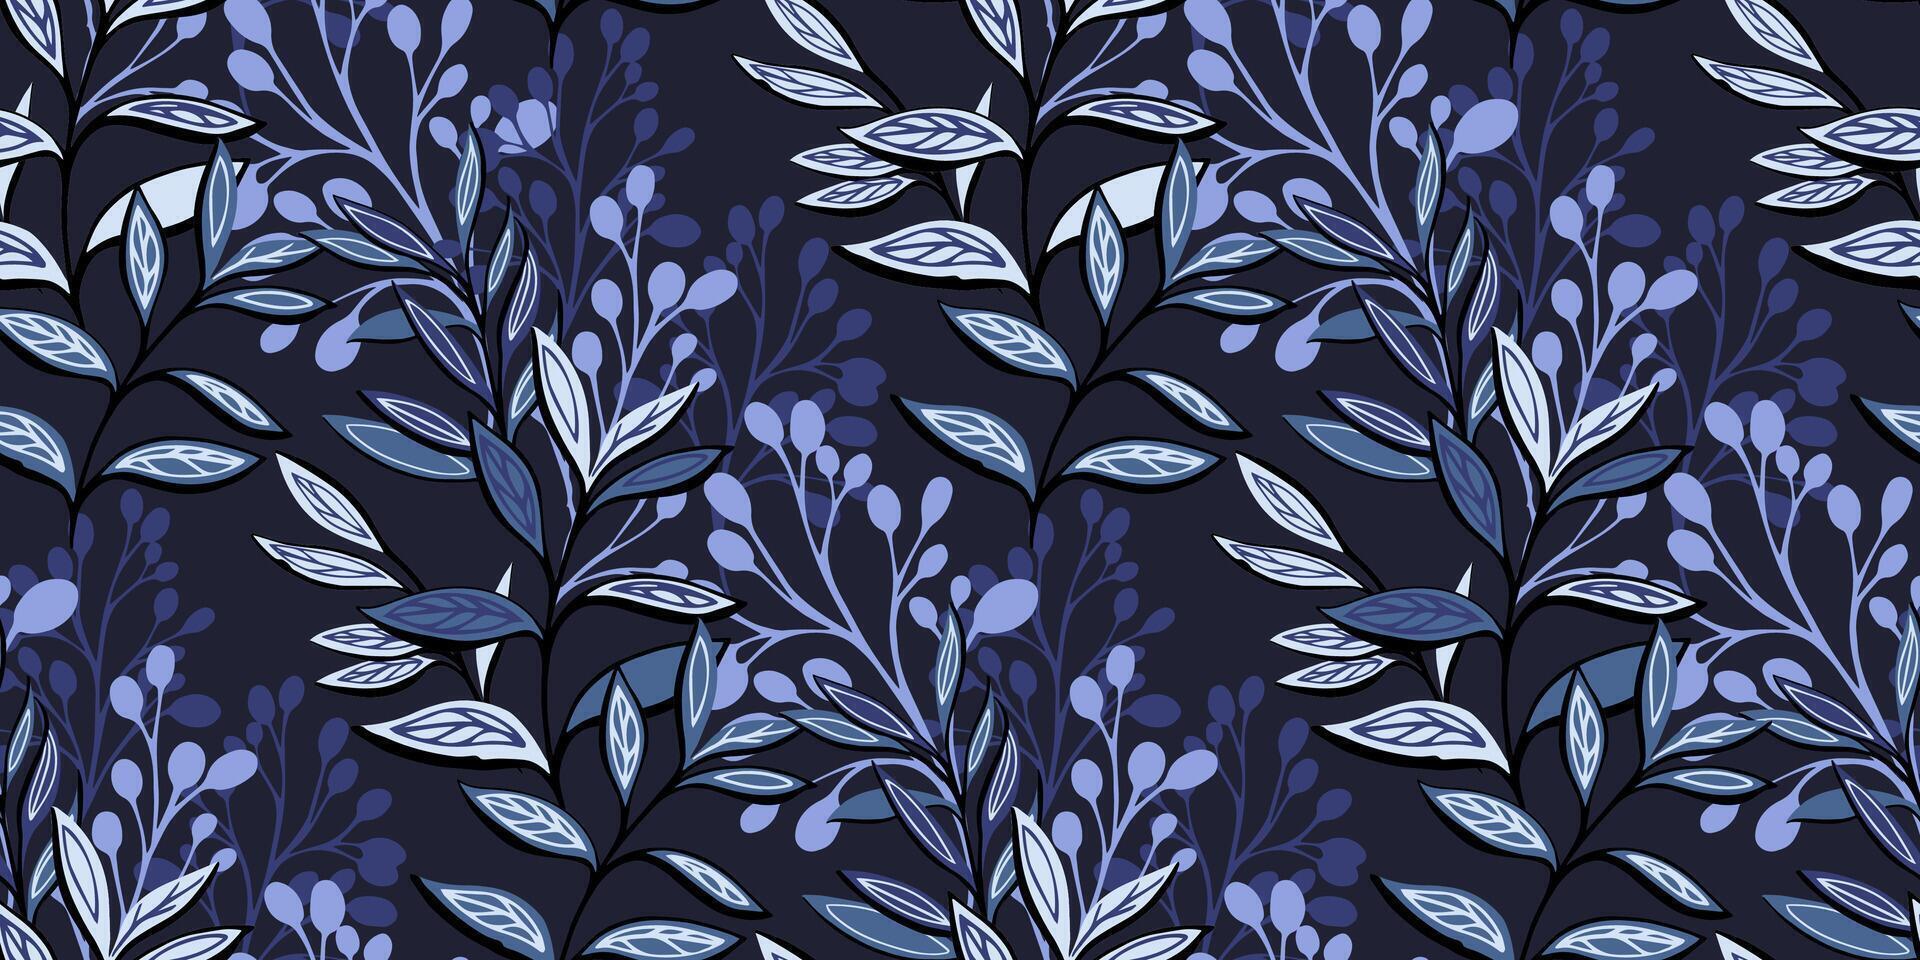 Seamless pattern with modern, abstract large leaves and silhouettes branches. Vector hand drawn. Stylized shape floral leaf printing. Dark blue creative botanical background. Template for design